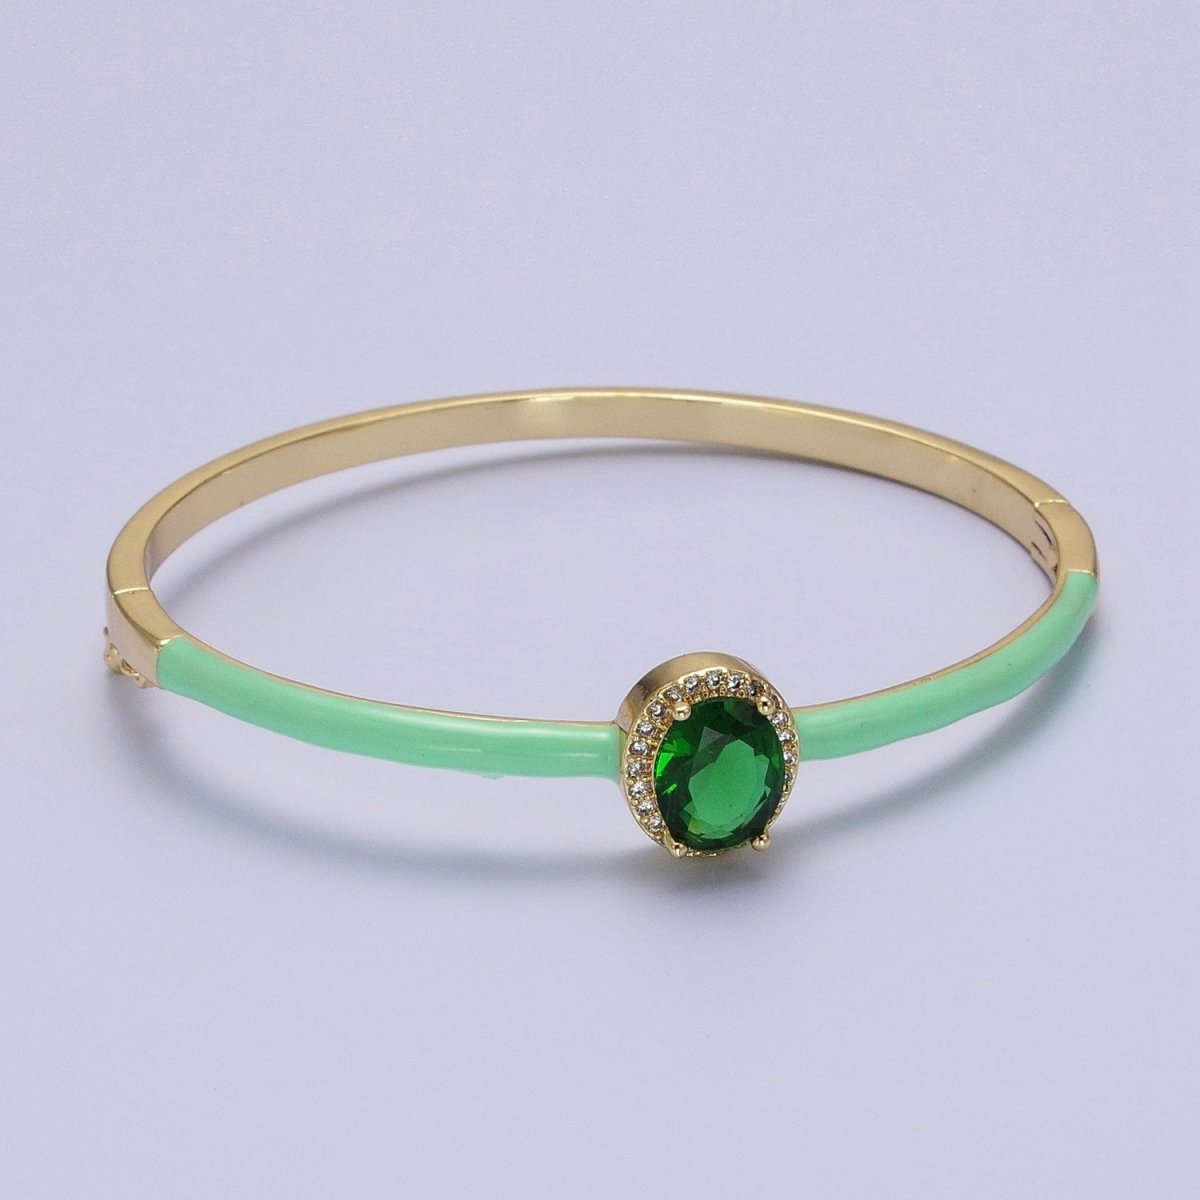 Barbie core Gold Filled Oval White, Green, Pink Micro Paved Enamel Gold Bangle Bracelet | WA-1348 - WA-1350 Clearance Pricing - DLUXCA